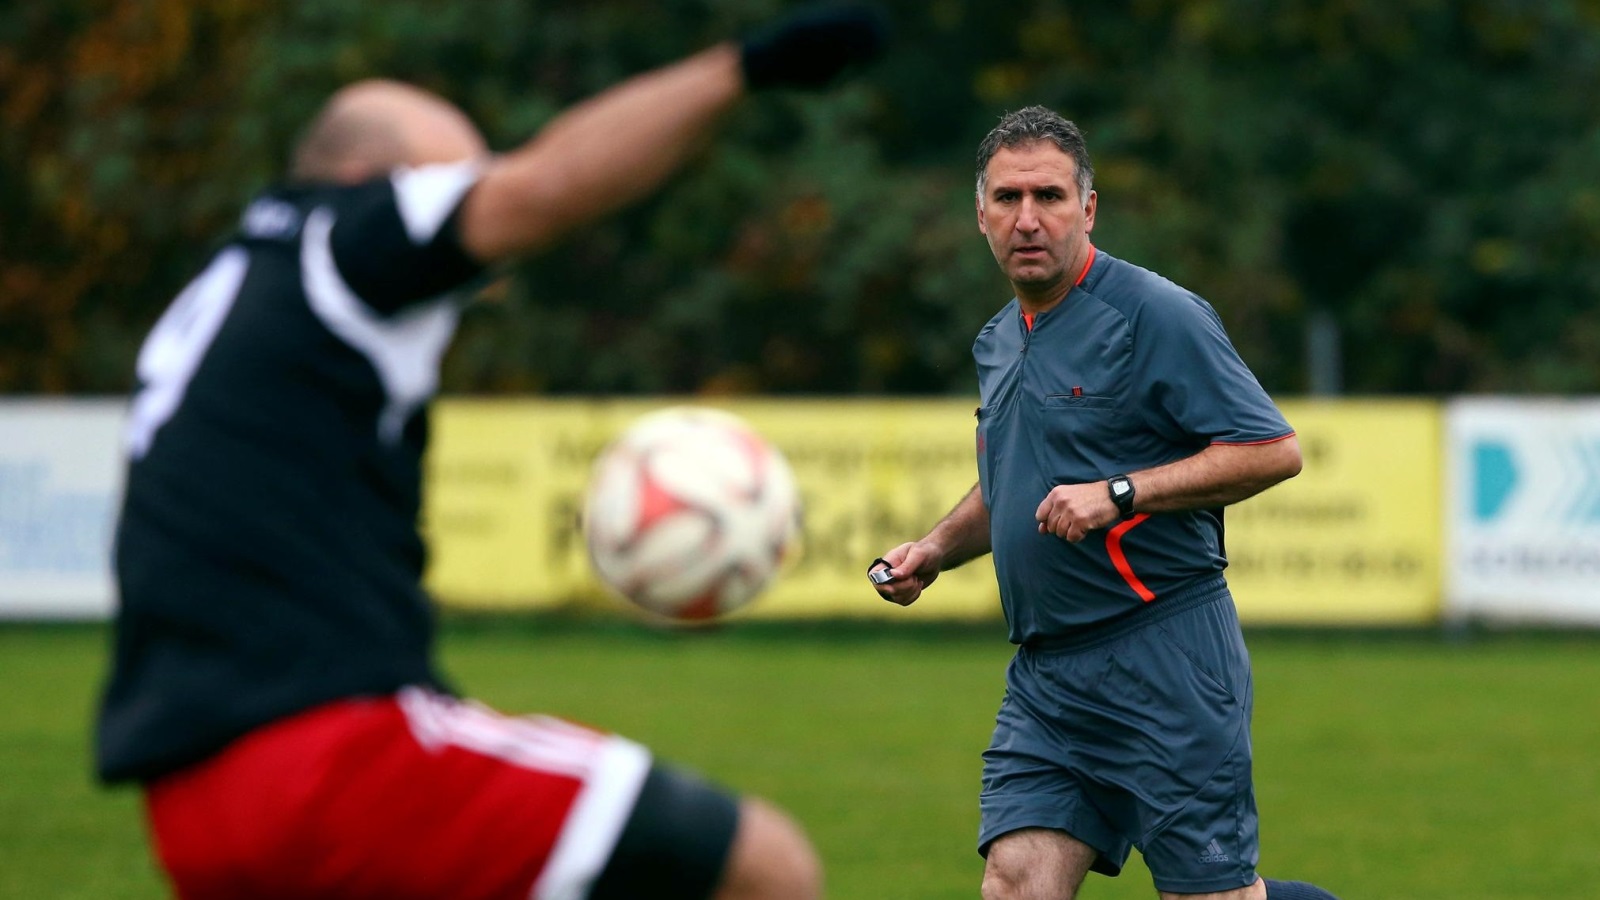 Former FIFA referee Hamdi Al Kadri conducts a German 9th division soccer match between TSV Pyrbaum and FC Altdorf in Pyrbaum, southern Germany, November 6, 2016. Picture taken November 6, 2016. Syrian migrant Al-Kadri was member of the referee team at high level FIFA matches, such as World Cup bouts  before he came to Germany as a Syrian refugee. REUTERS/Michael Dalder